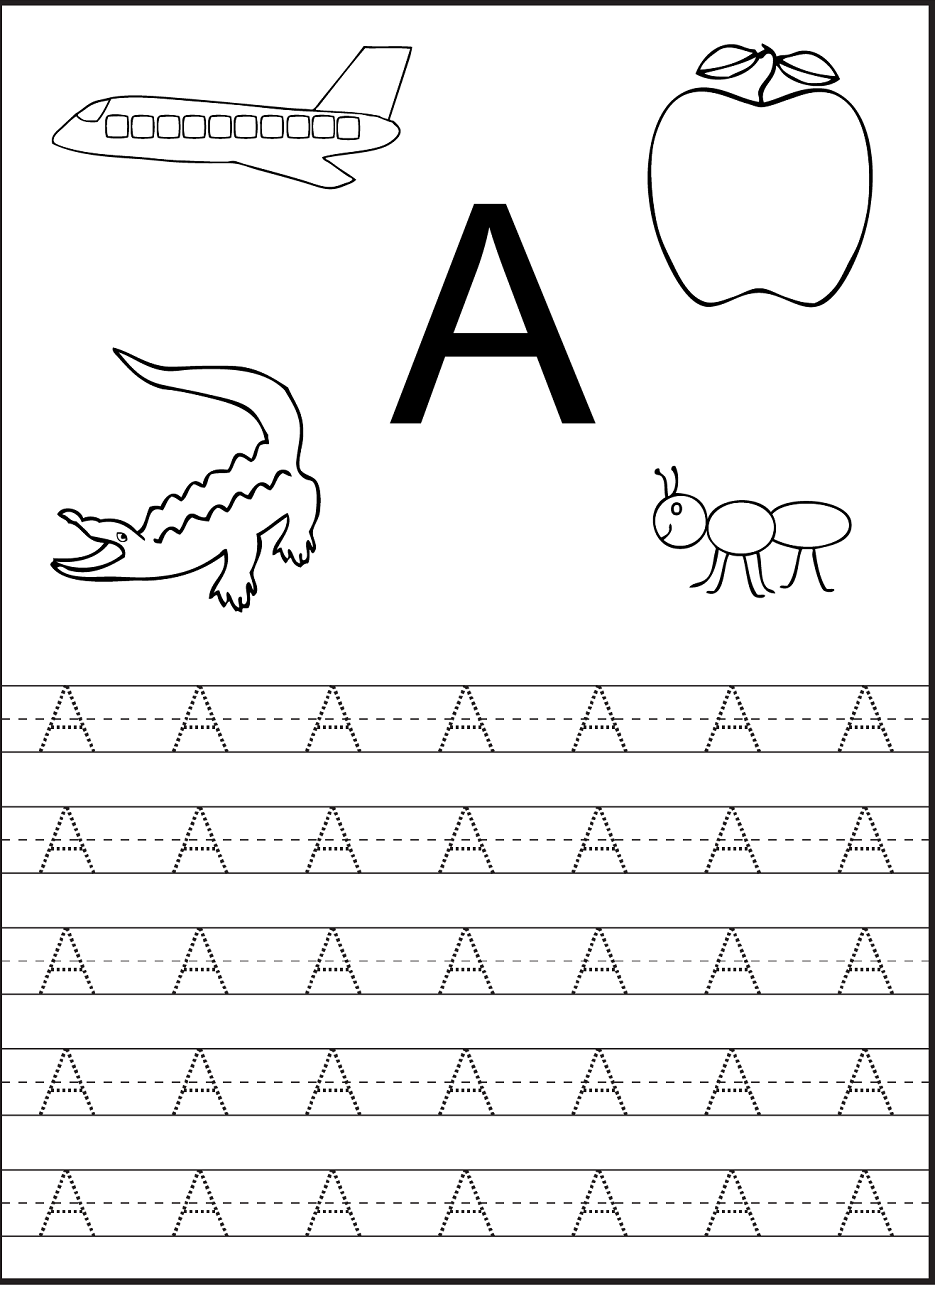 Tracing The Letter A Free Printable | Tracing Worksheets with regard to A Letter Tracing